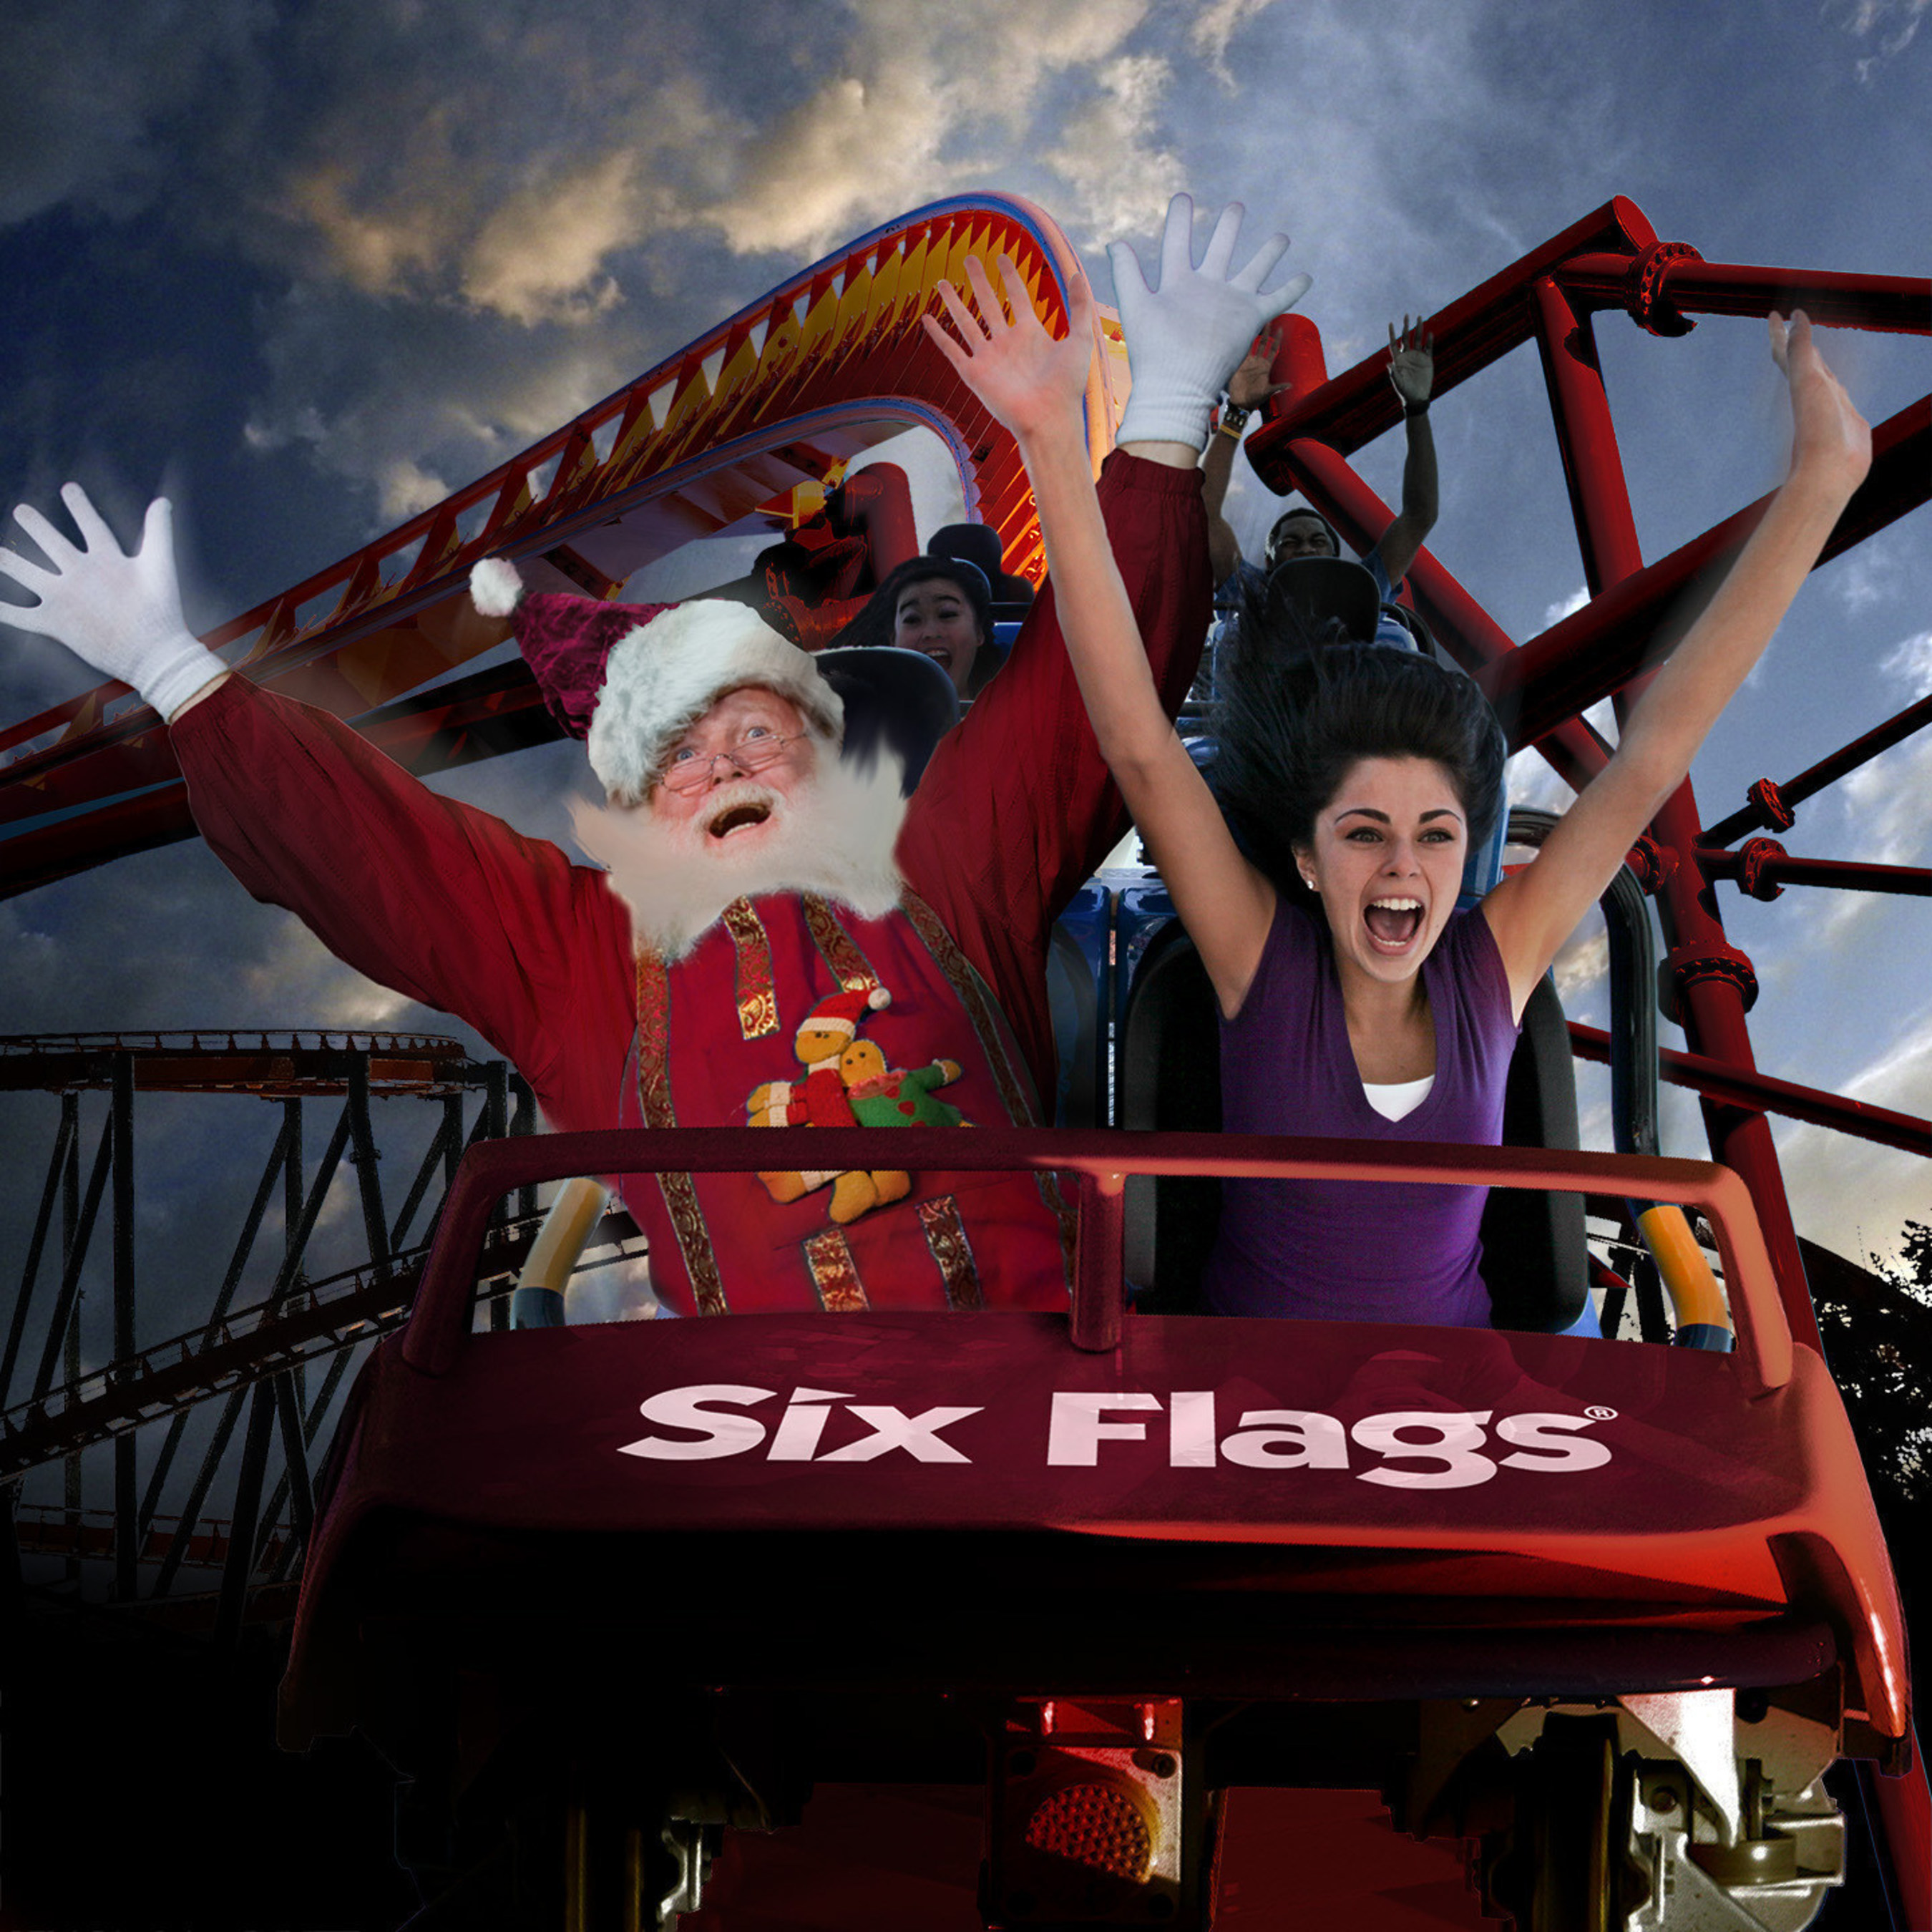 Six Flags Great Adventure will debut Holiday in the Park this winter, featuring millions of glittering lights, dazzling holiday entertainment, delicious seasonal treats, Santa's village, animals and many popular rides. The special seasonal event will run weekends and select days from November 21 through January 3, 2016.